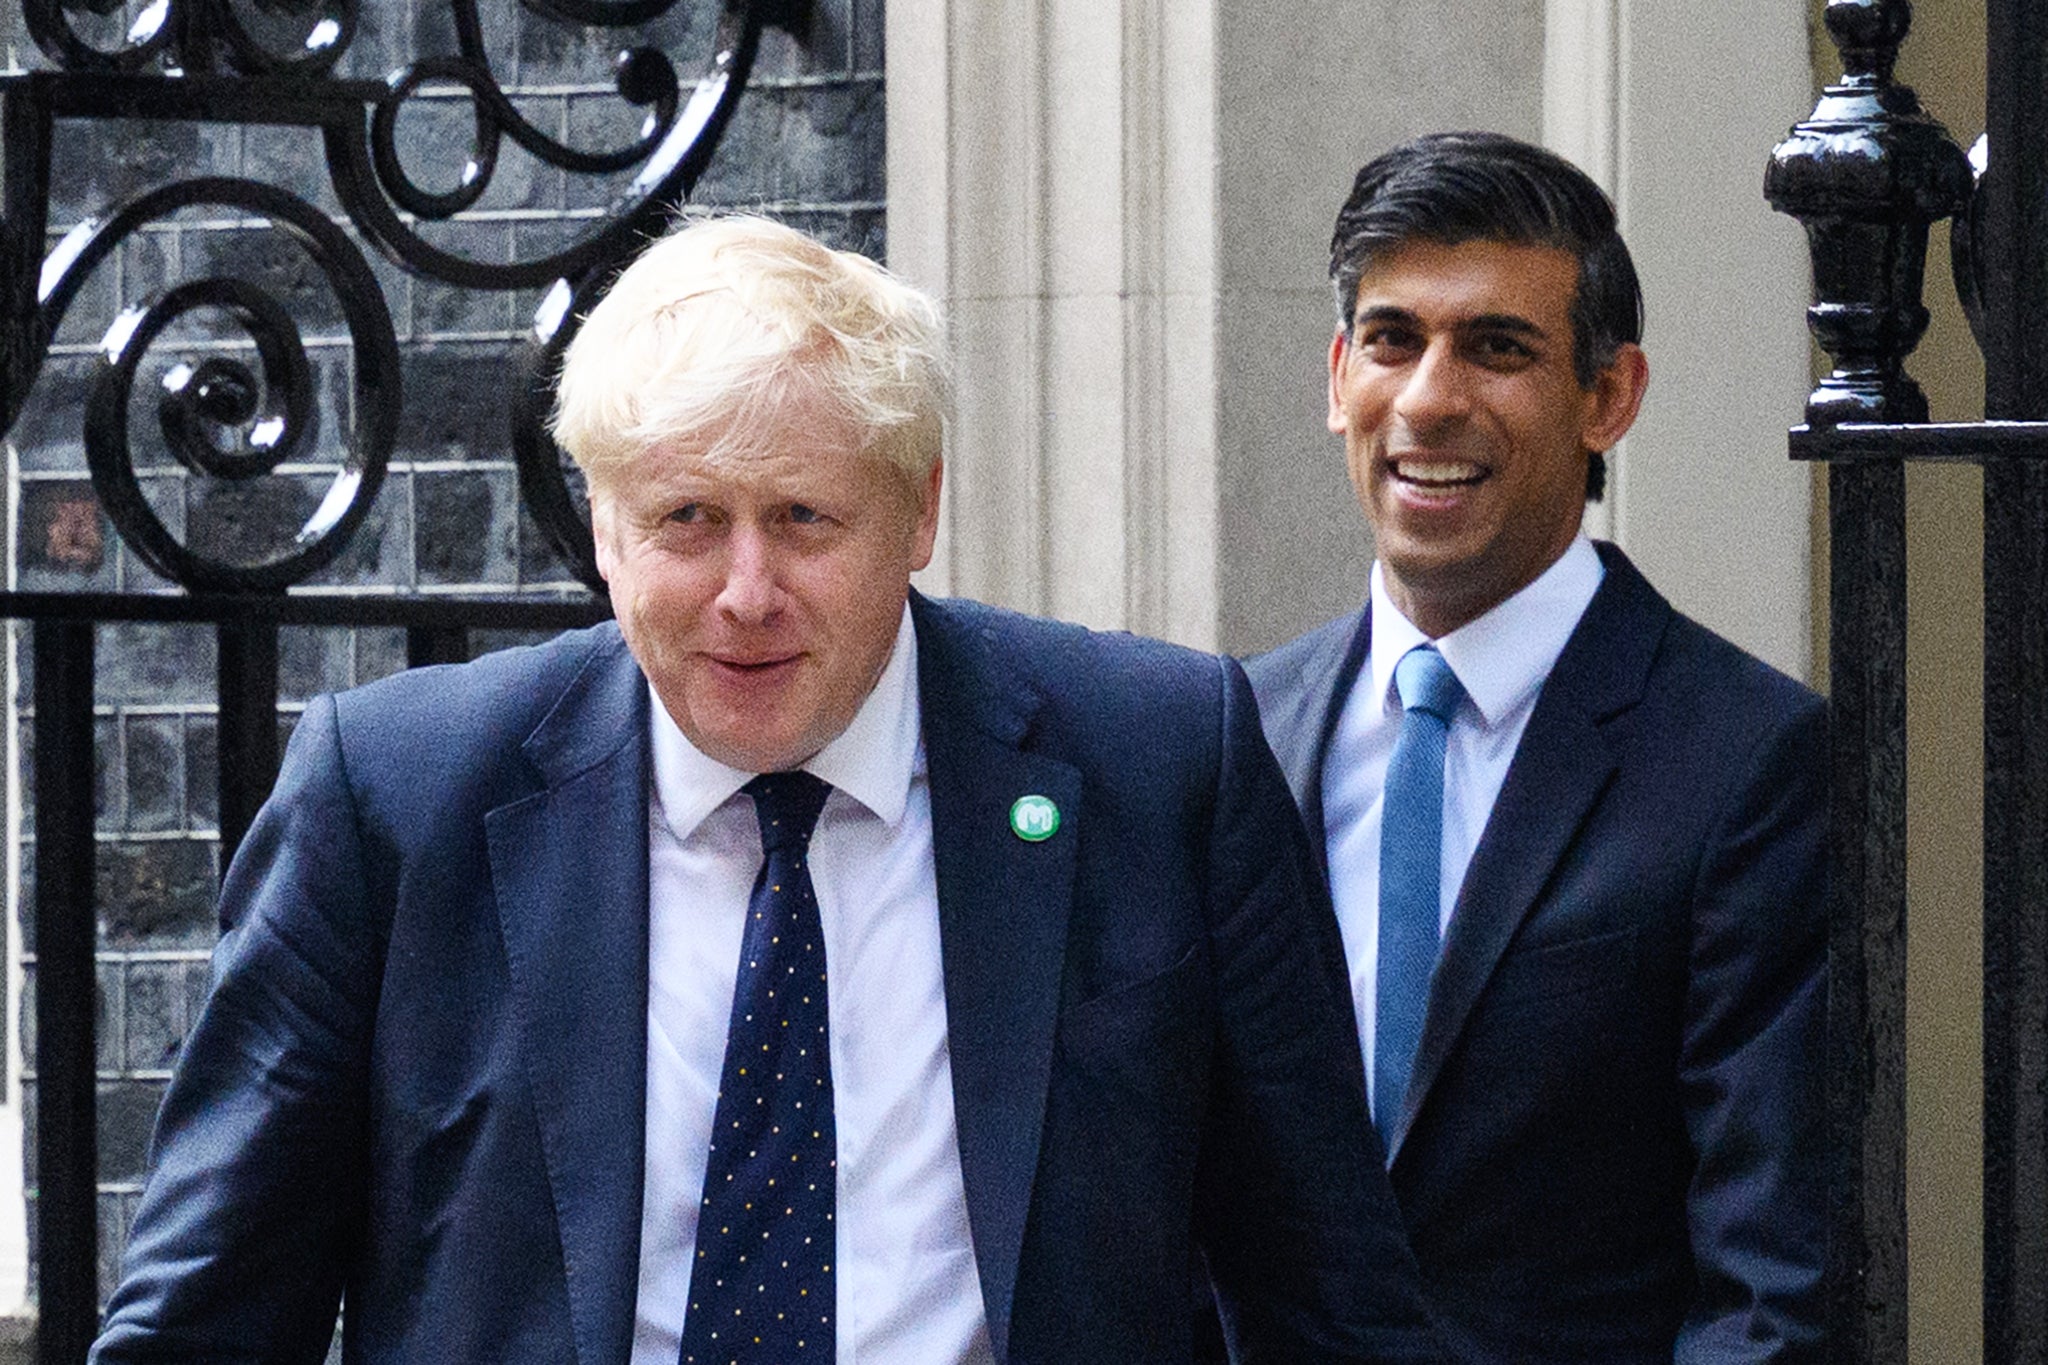 So-called ‘pasta plotters’ are hoping to bring back Boris Johnson to replace Rishi Sunak